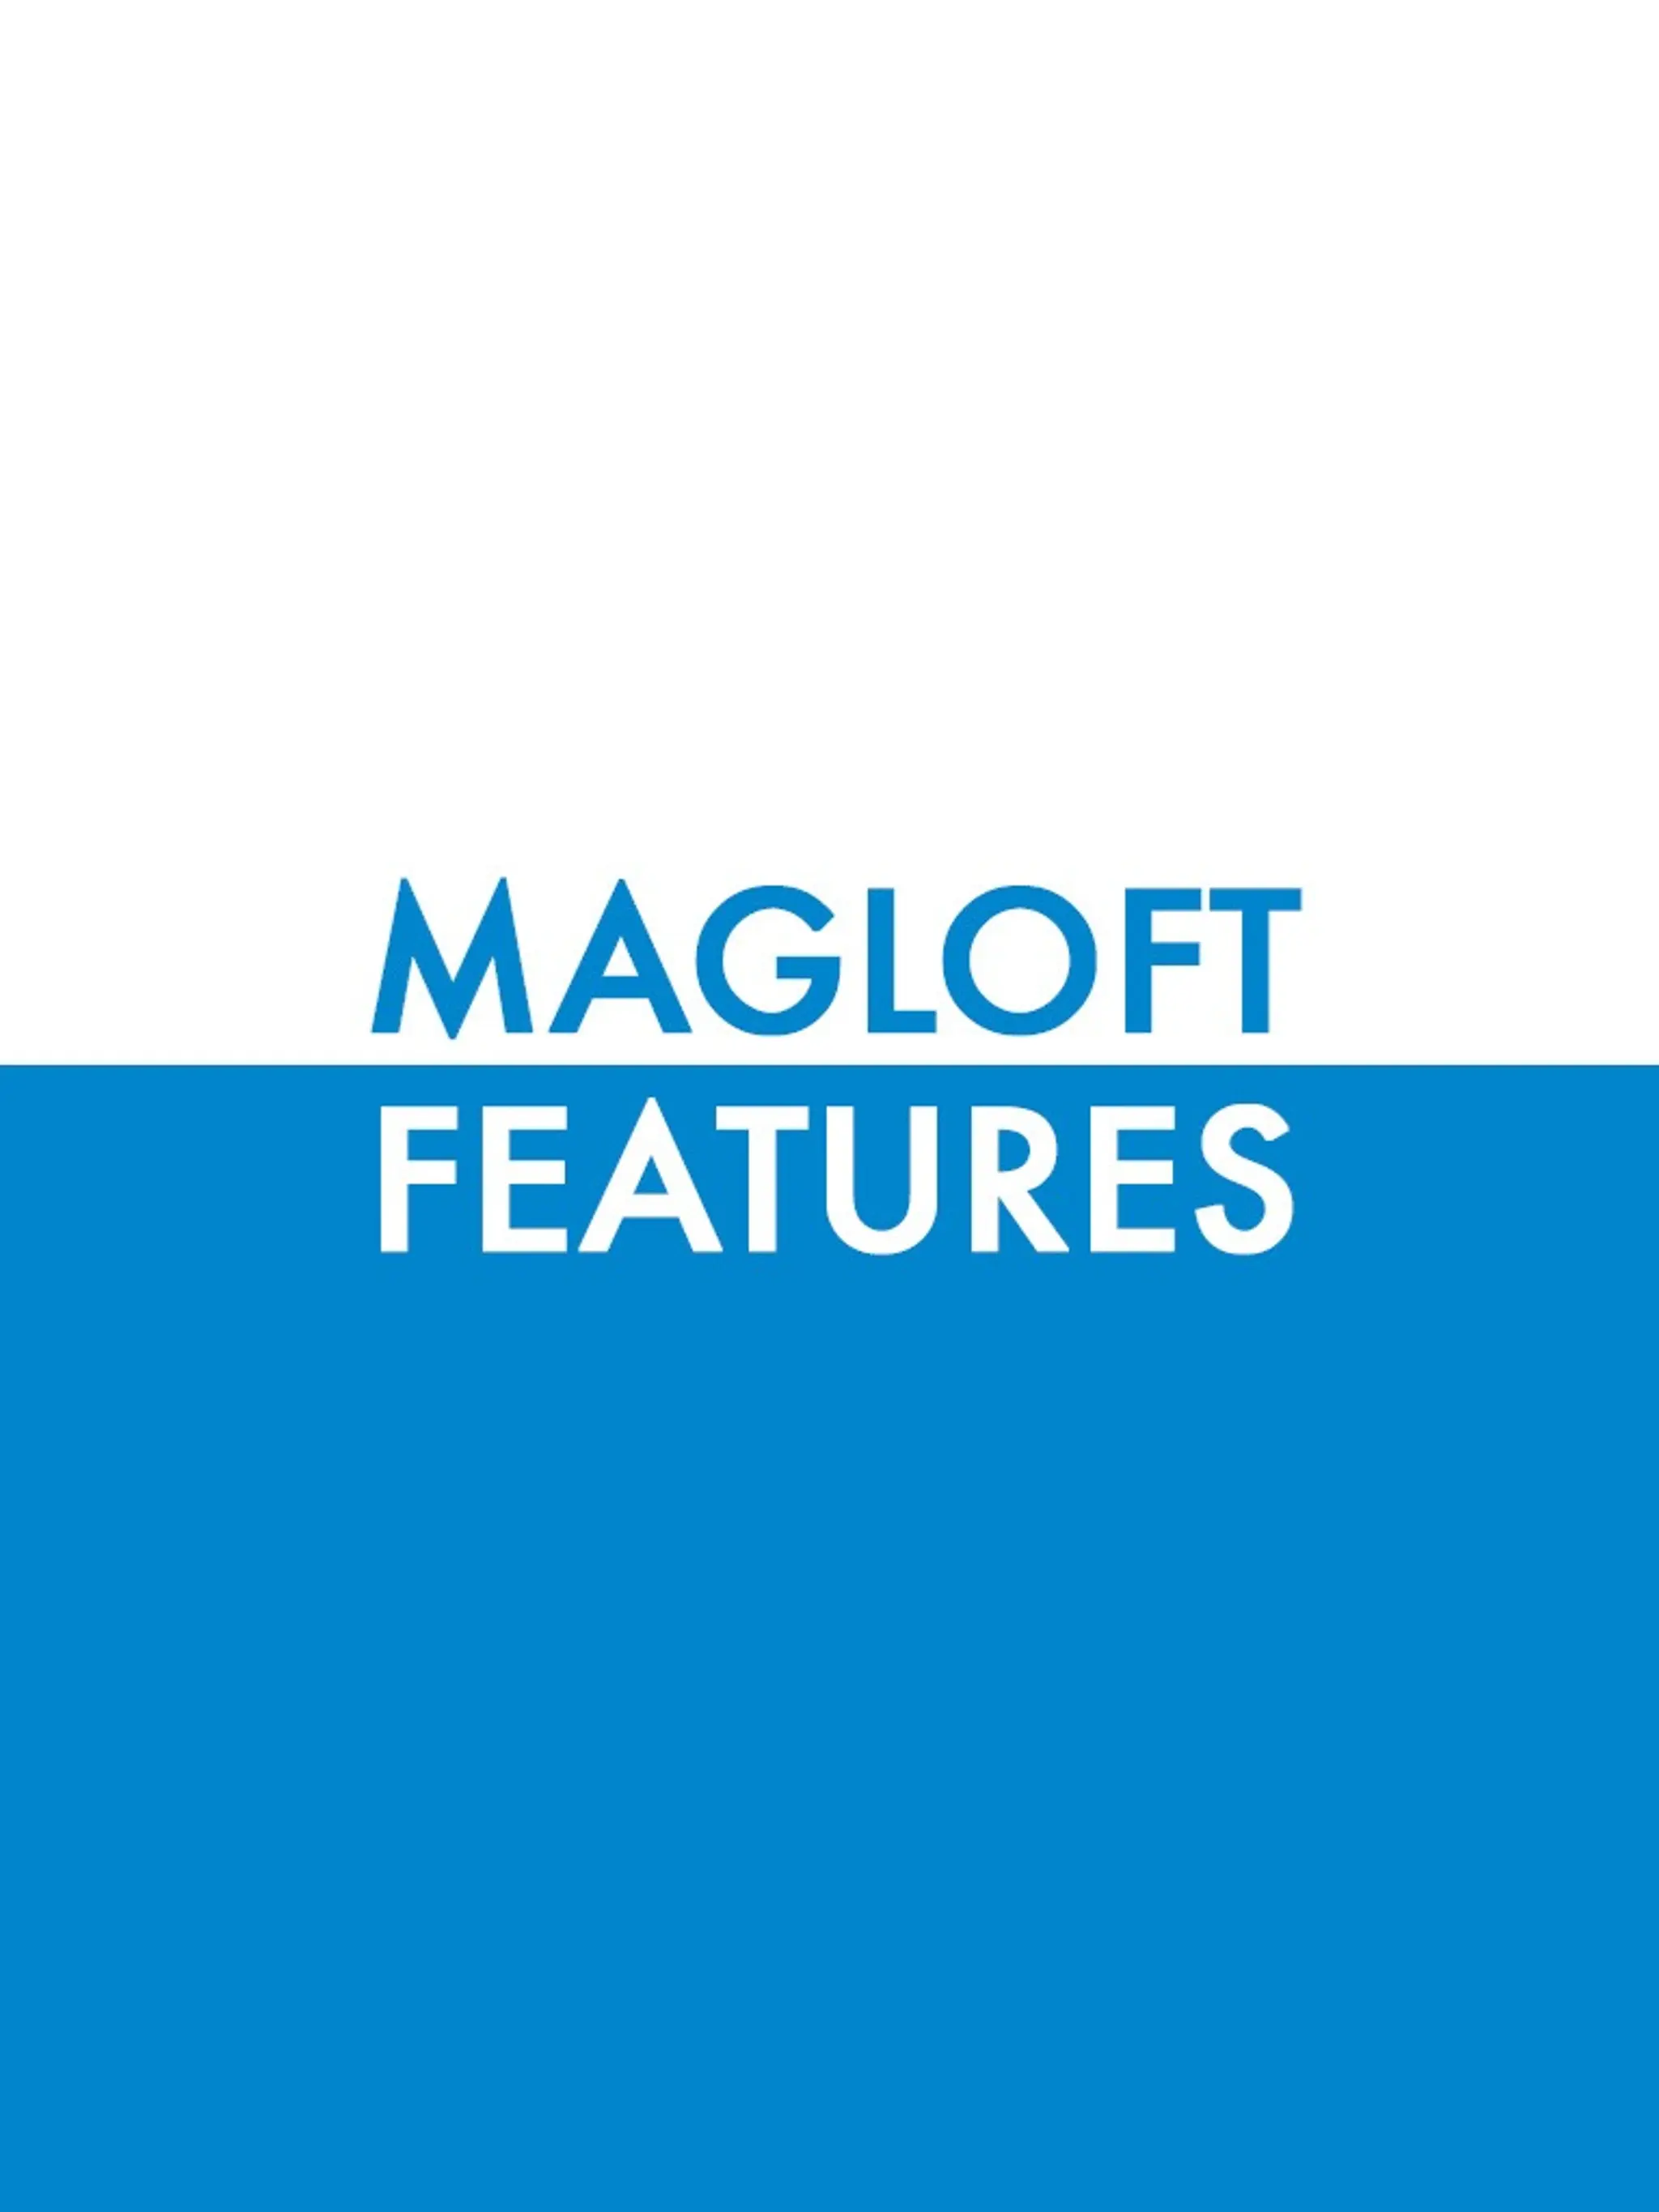 MagLoft Features - See What MagLoft Can Do For You